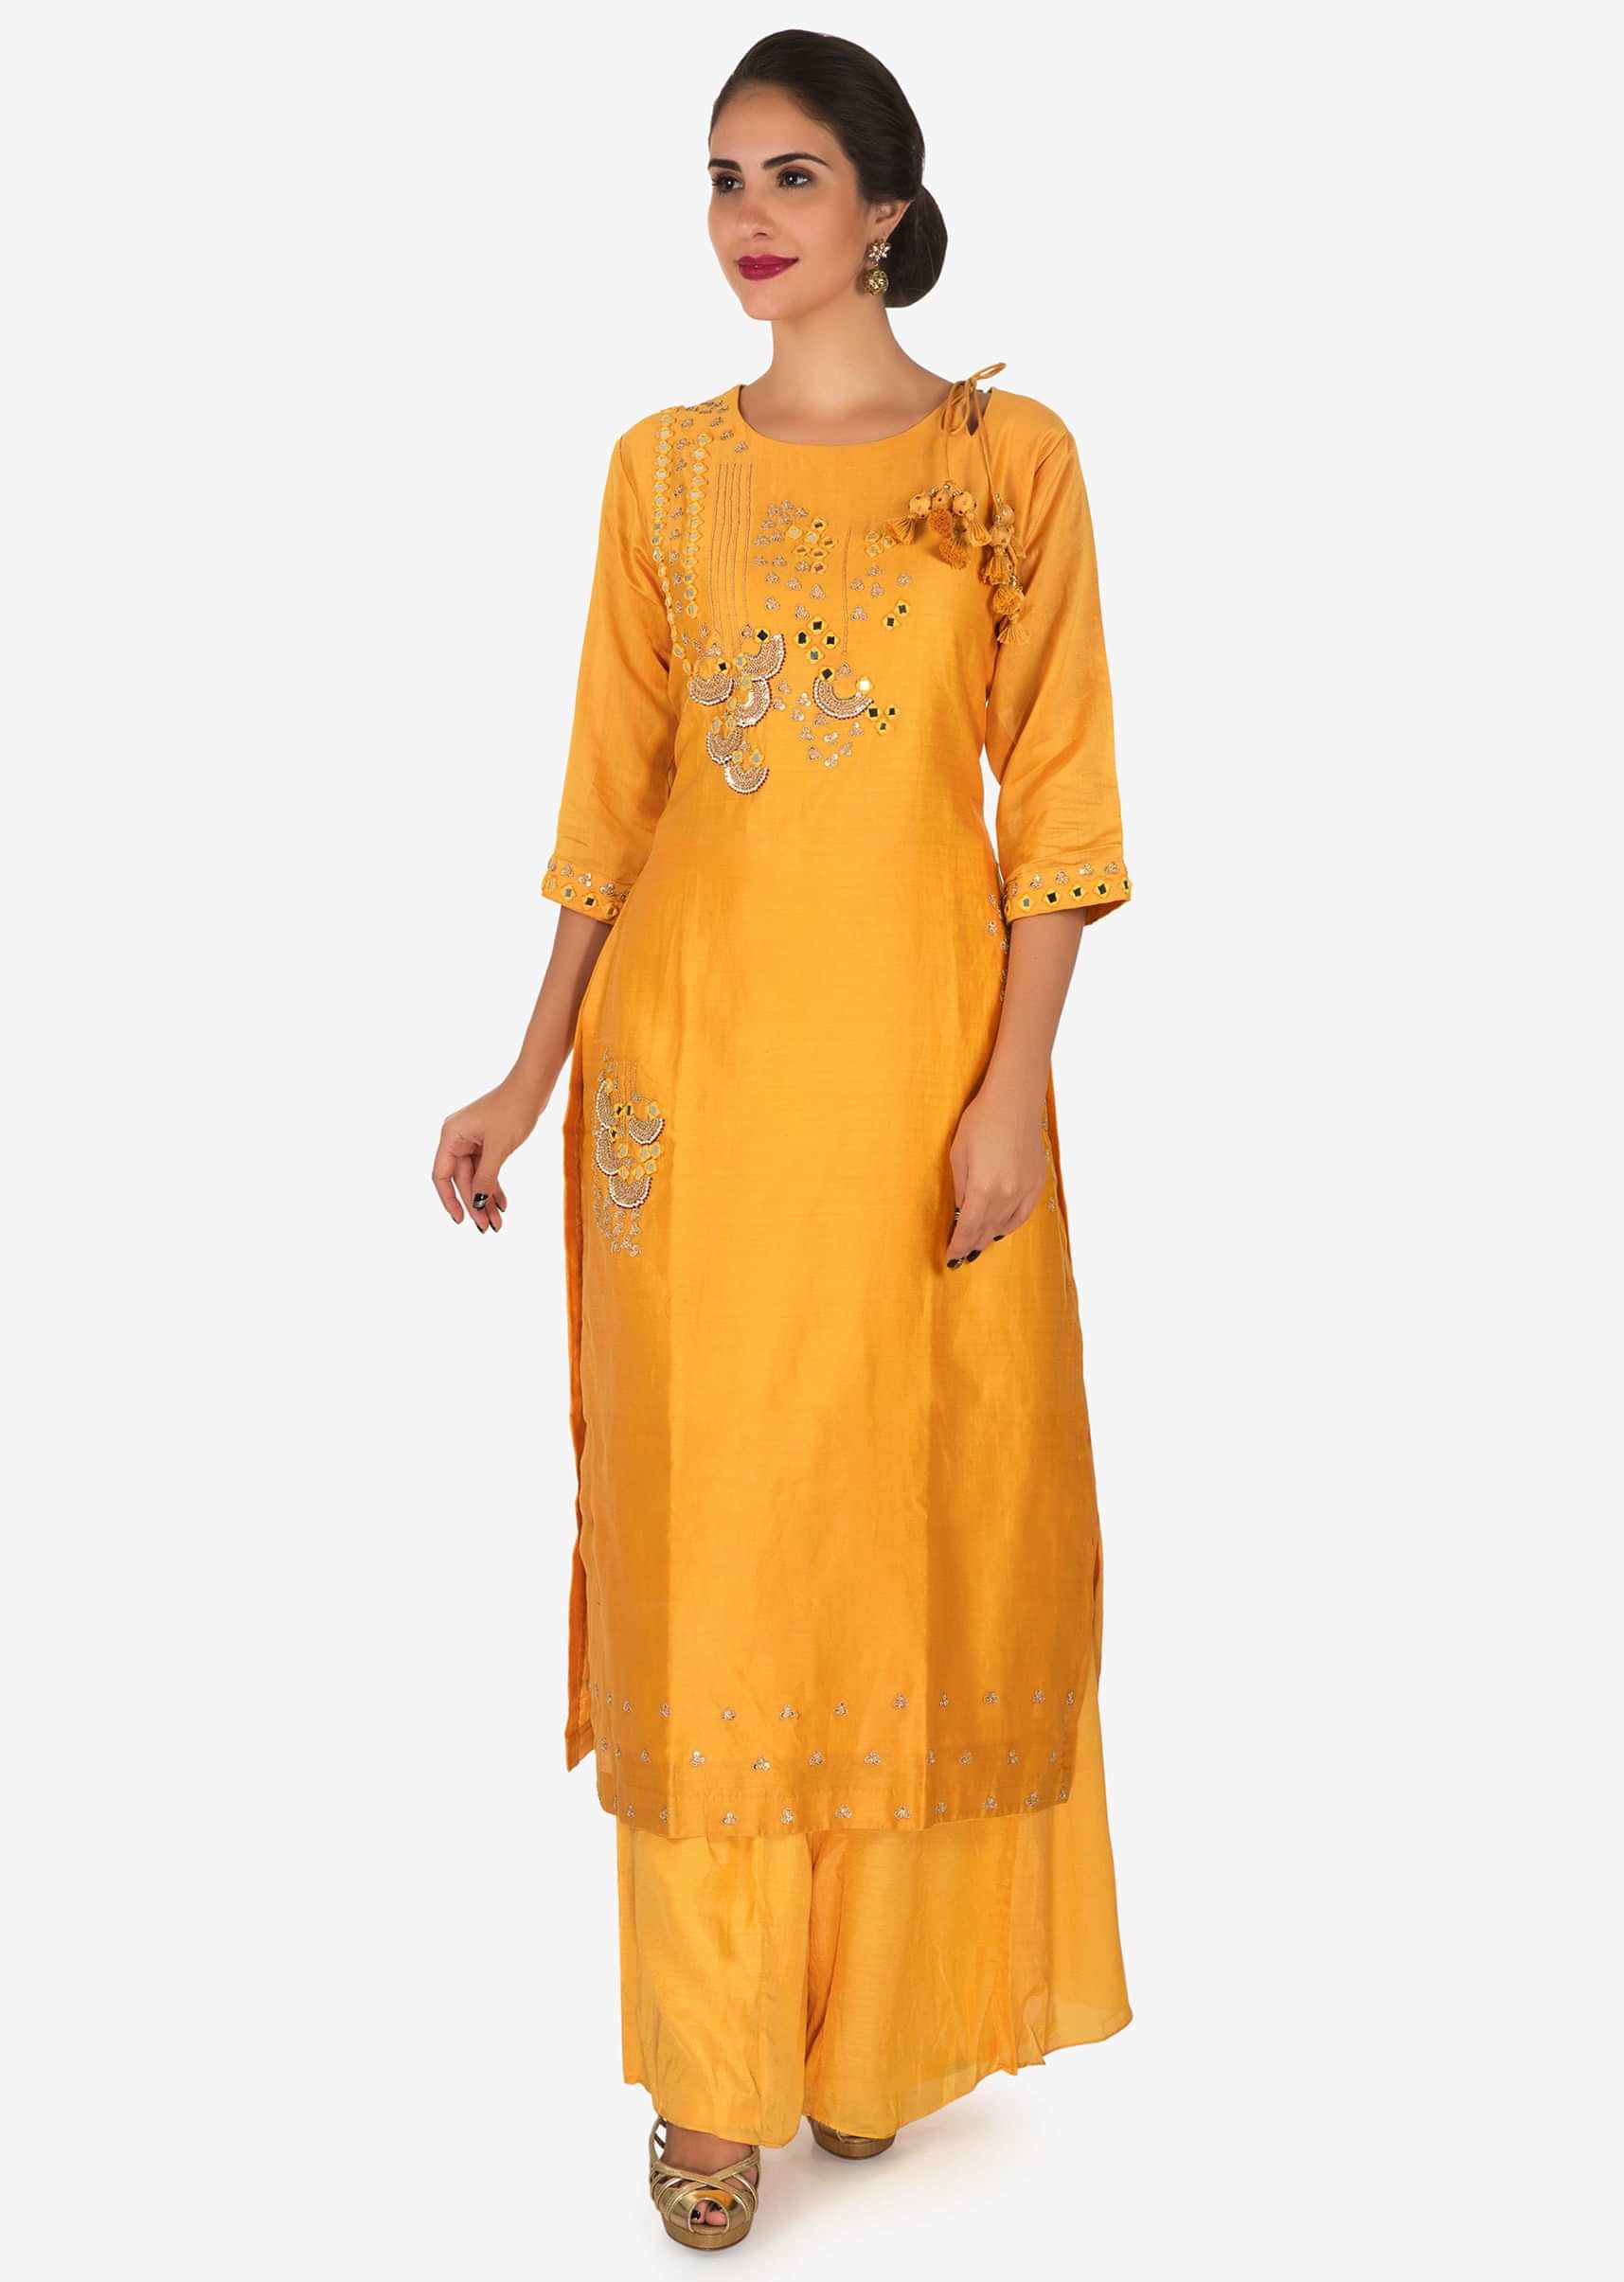 Yellow palazzo suit in cotton adorn in zari and moti embroidery work only on Kalki